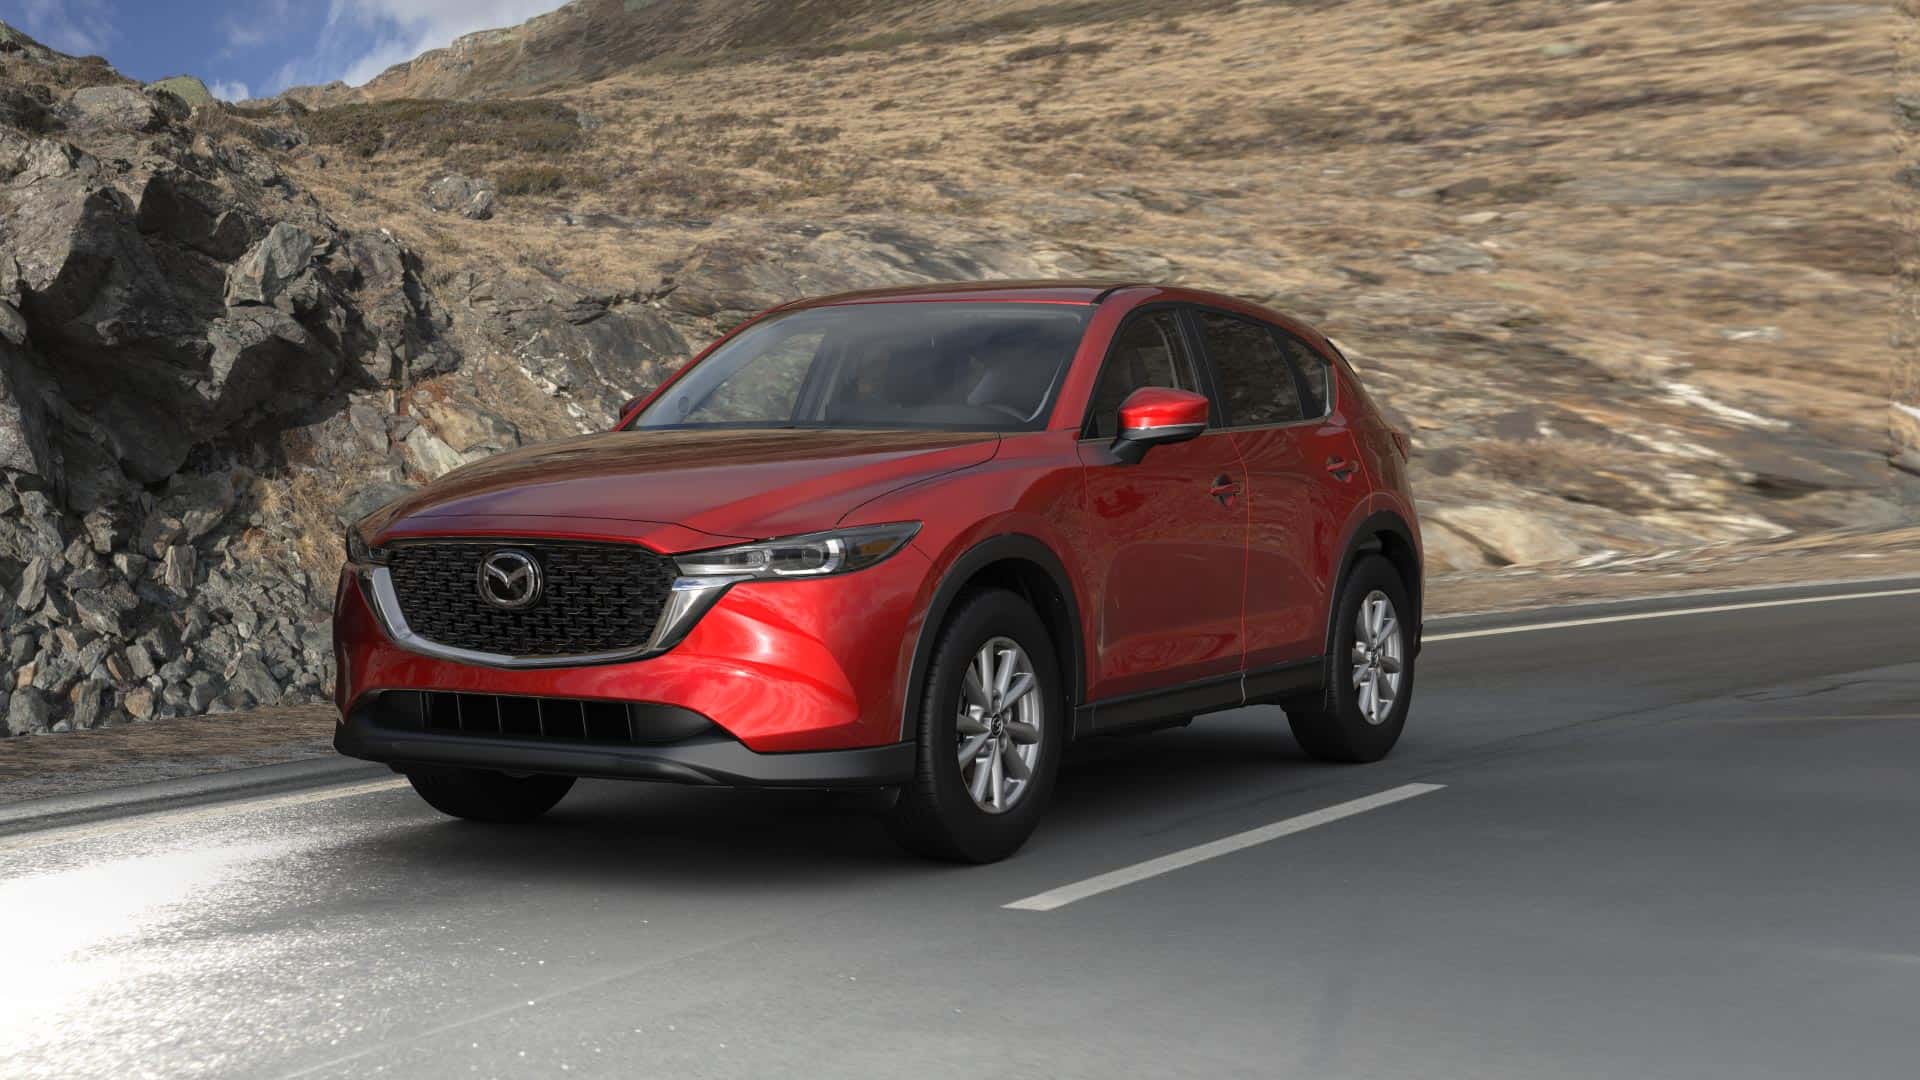 2023 Mazda CX-5 2.5 S Select Soul Red Crystal Metallic | Casa Mazda Las Cruces in Las Cruces NM